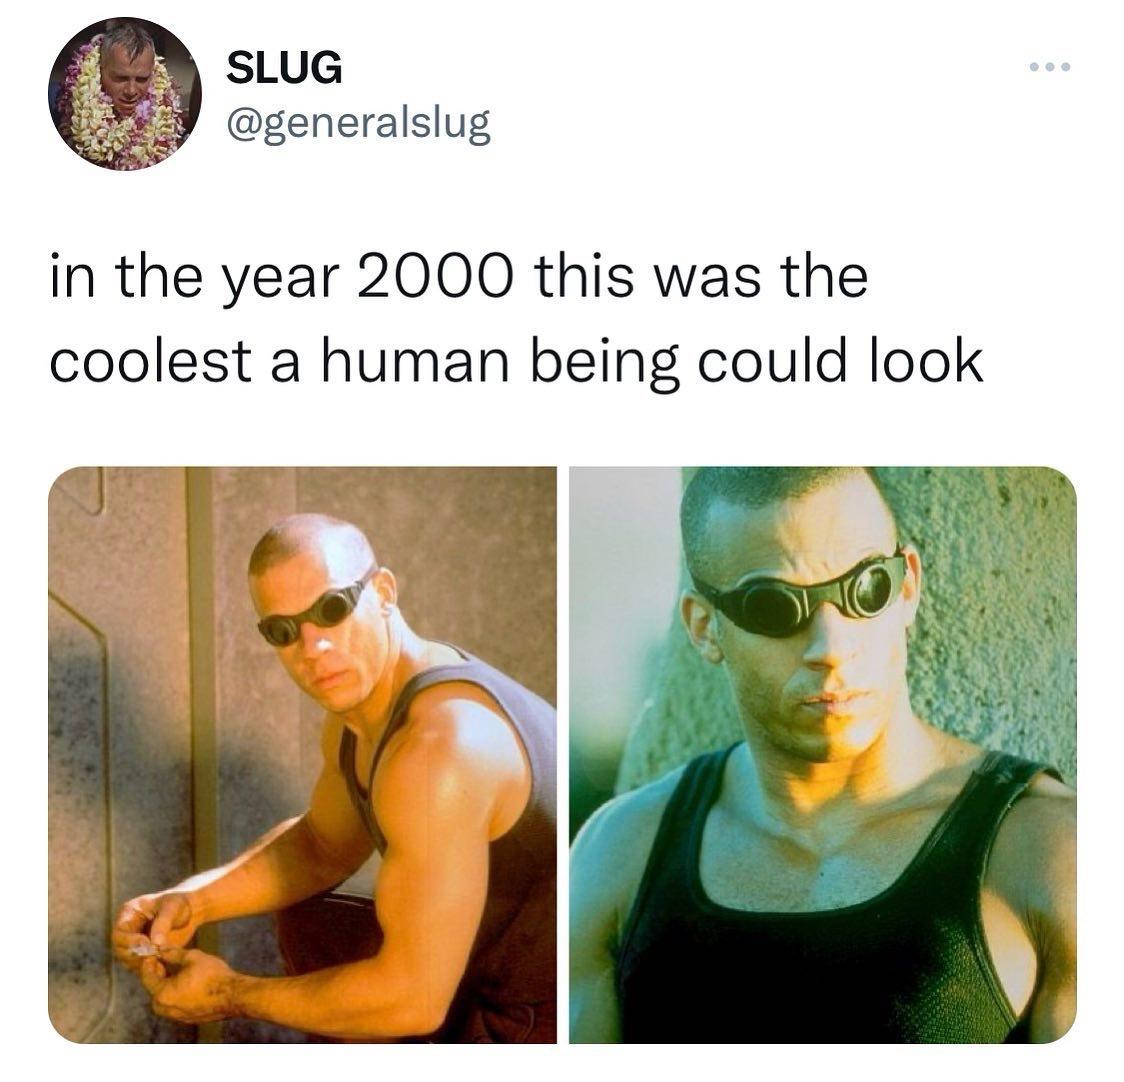 monday morning randomness - sunglasses - Slug in the year 2000 this was the coolest a human being could look